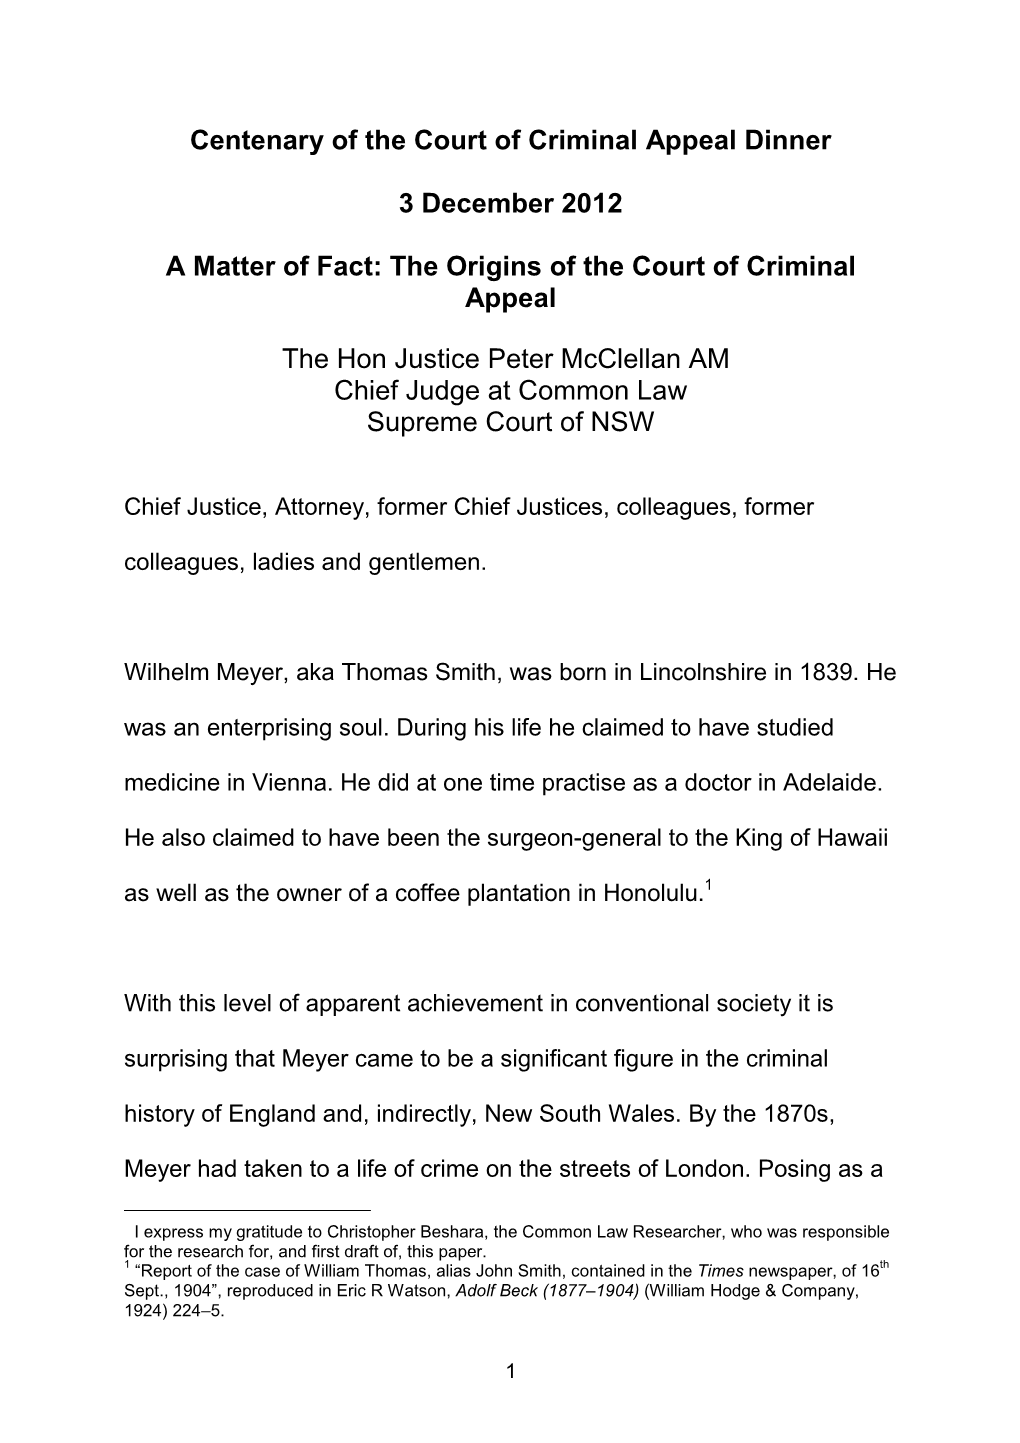 The Origins of the Court of Criminal Appeal T